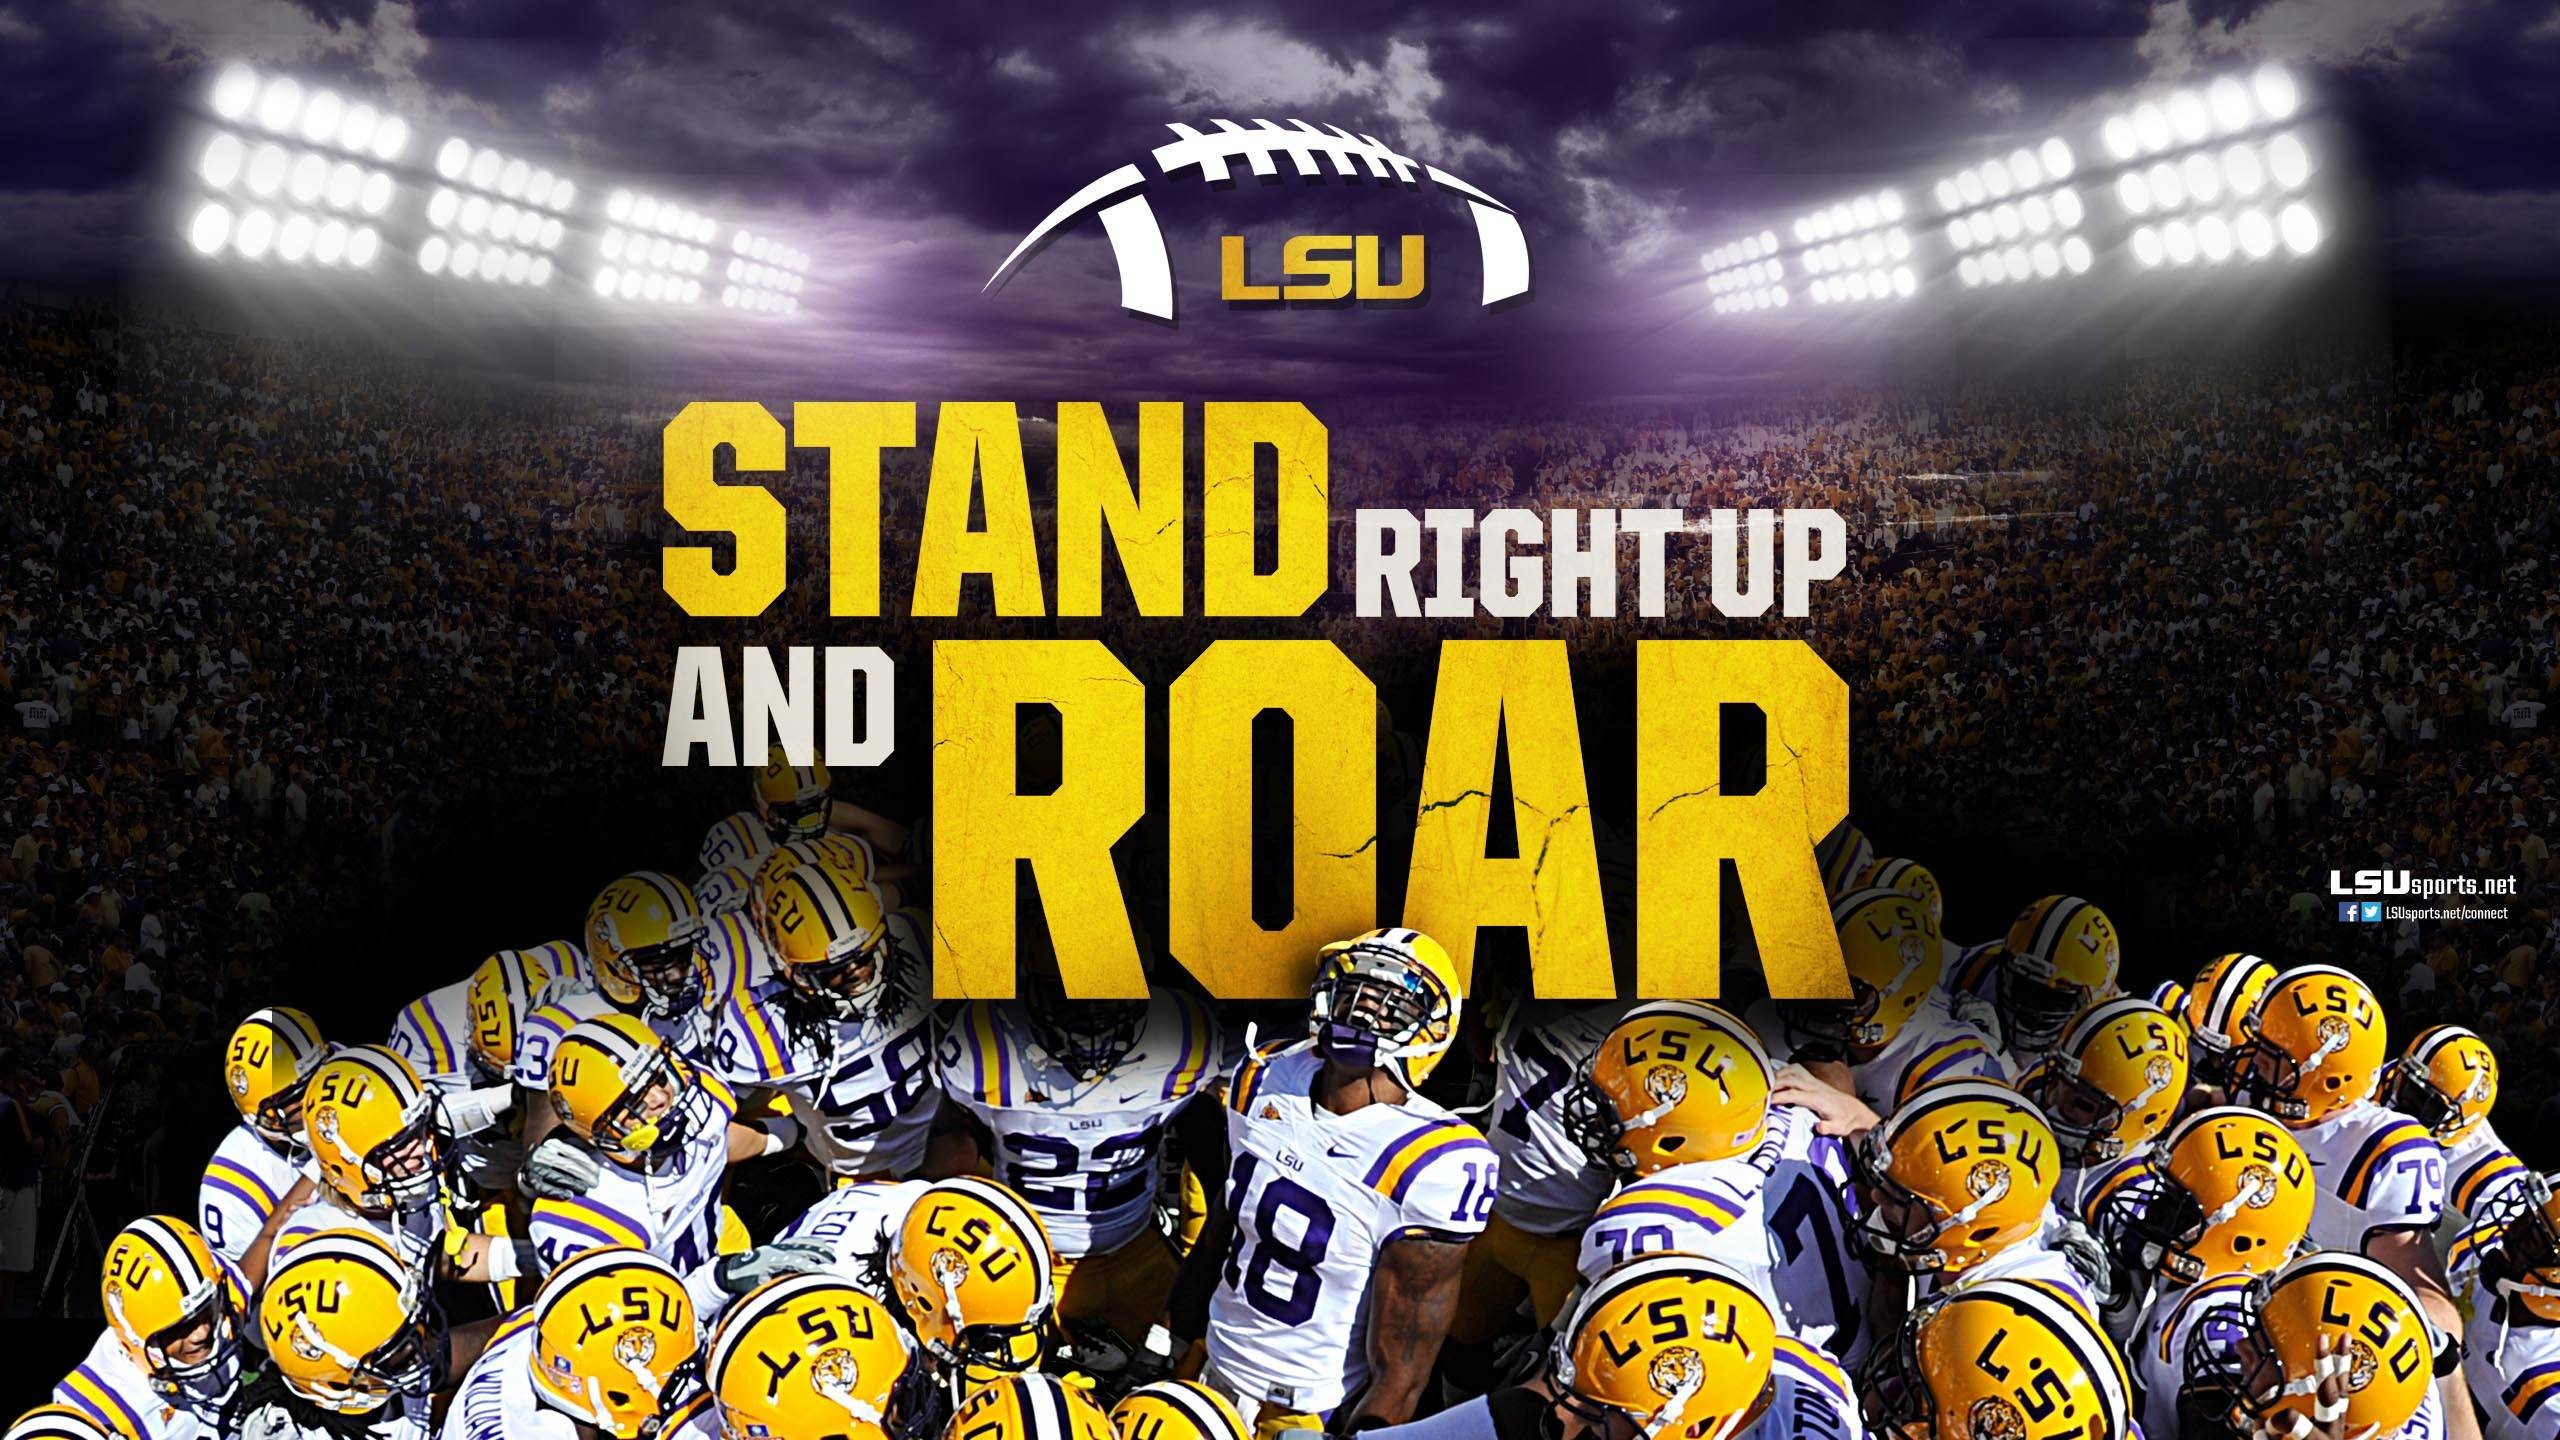 Download wallpapers LSU Tigers 4k american football team NCAA violet  yellow stone USA asphalt texture american football LSU Tigers logo for  desktop with resolution 3840x2400 High Quality HD pictures wallpapers